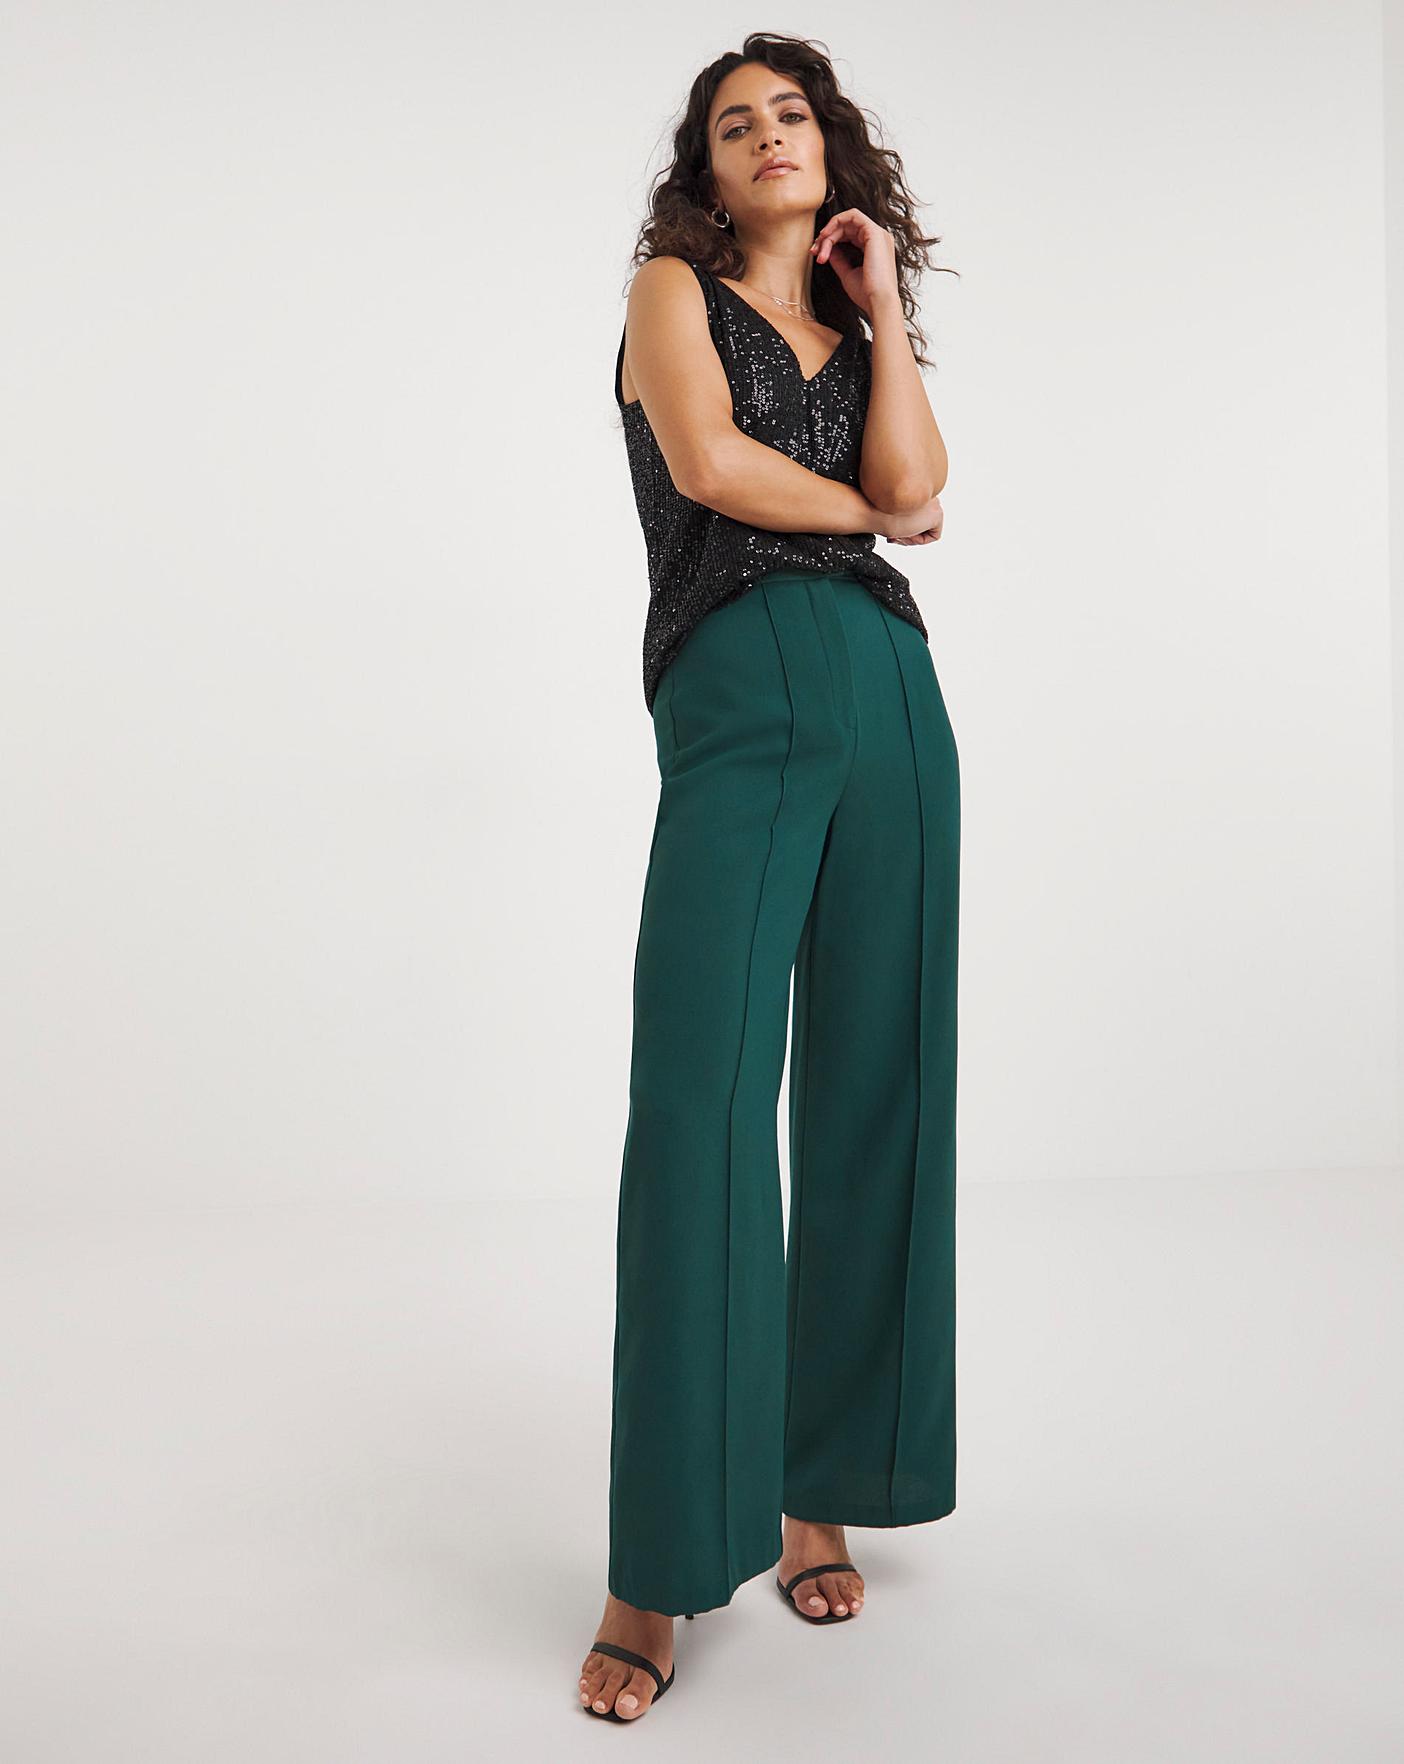 The Tall Wide Leg Pant in Crepe